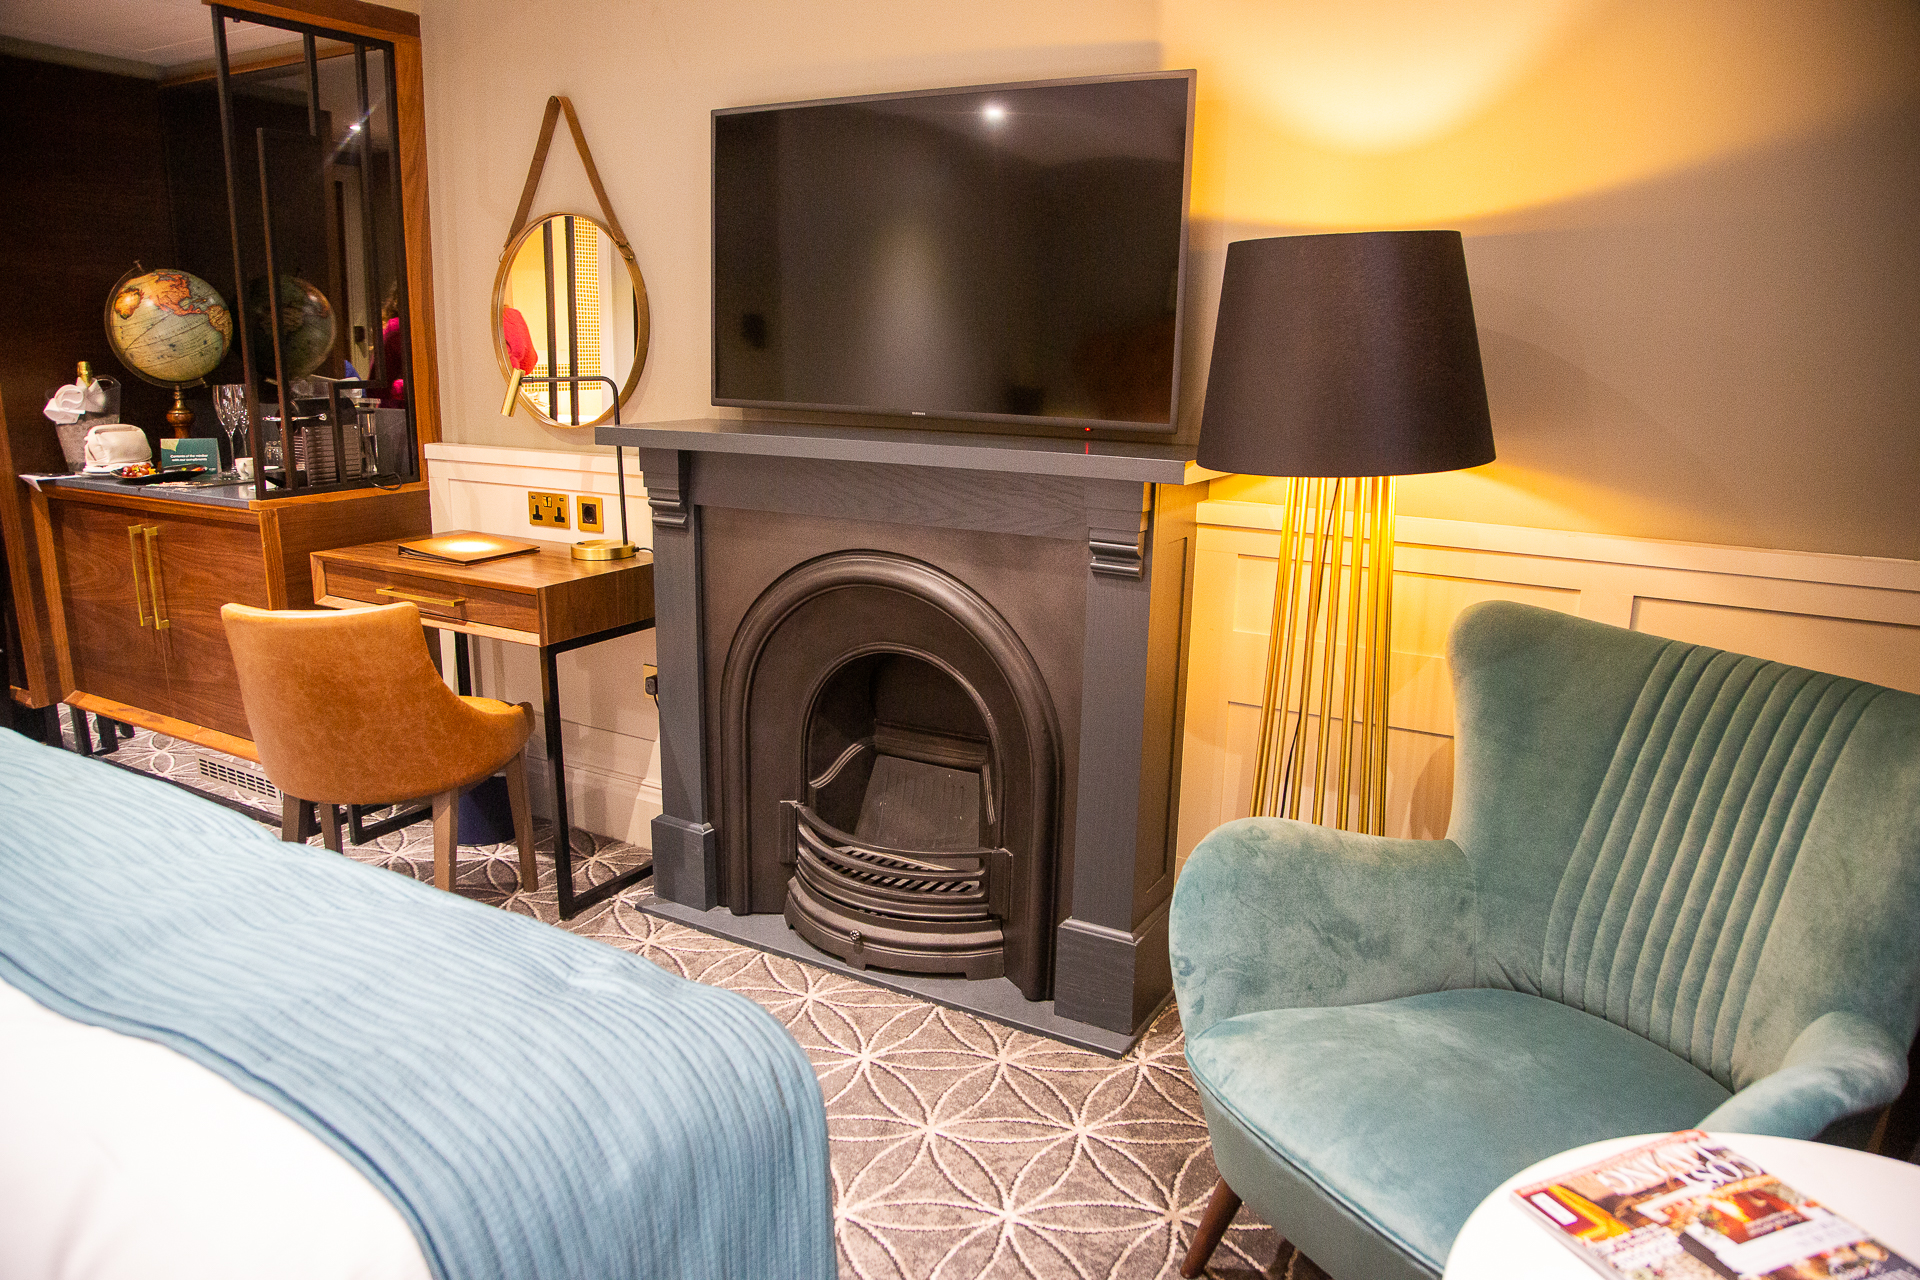 A Super Stay at 100 Queen’s Gate Hotel London + Competition